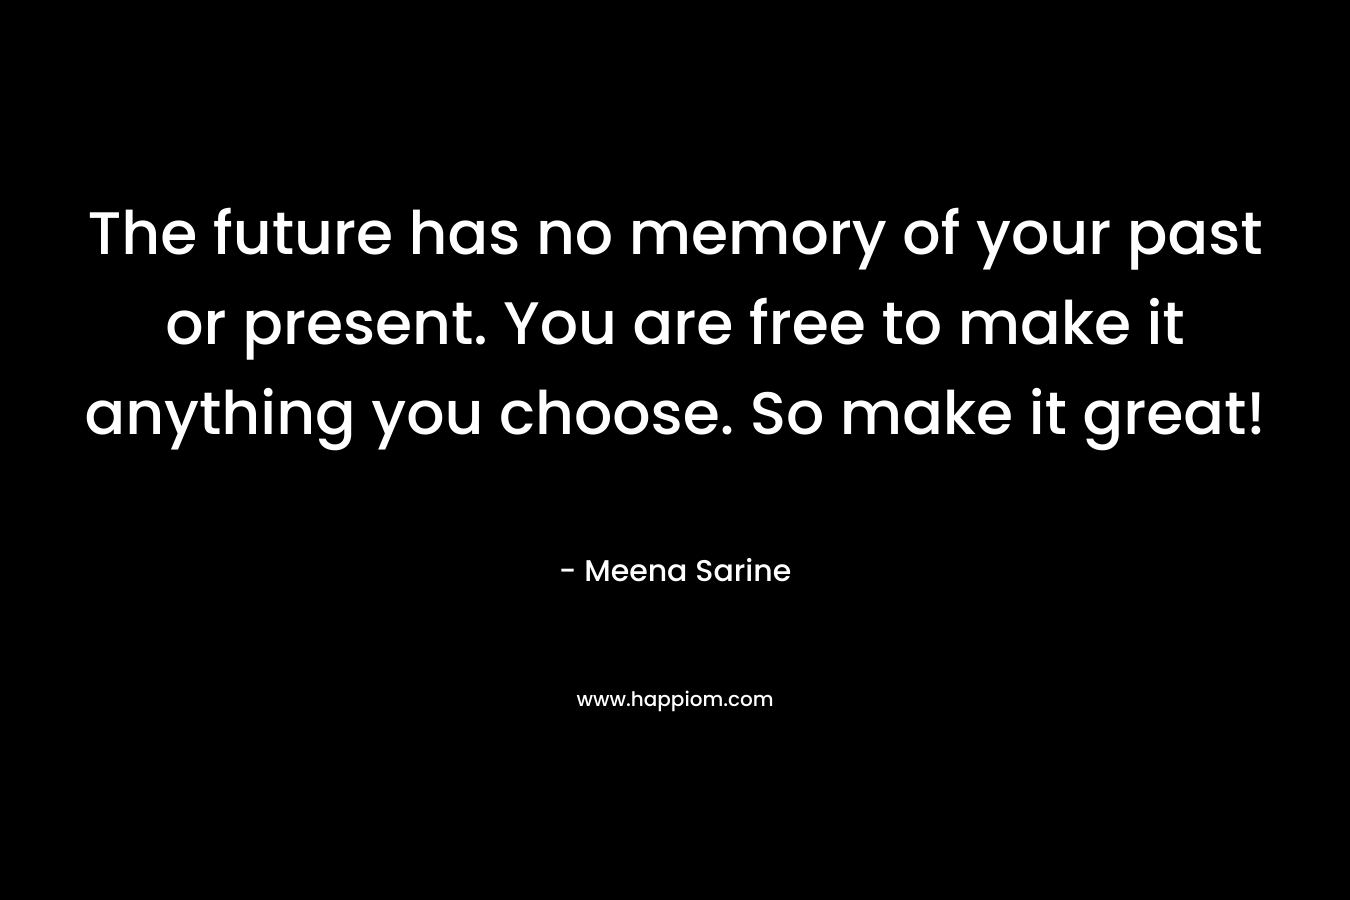 The future has no memory of your past or present. You are free to make it anything you choose. So make it great! – Meena Sarine